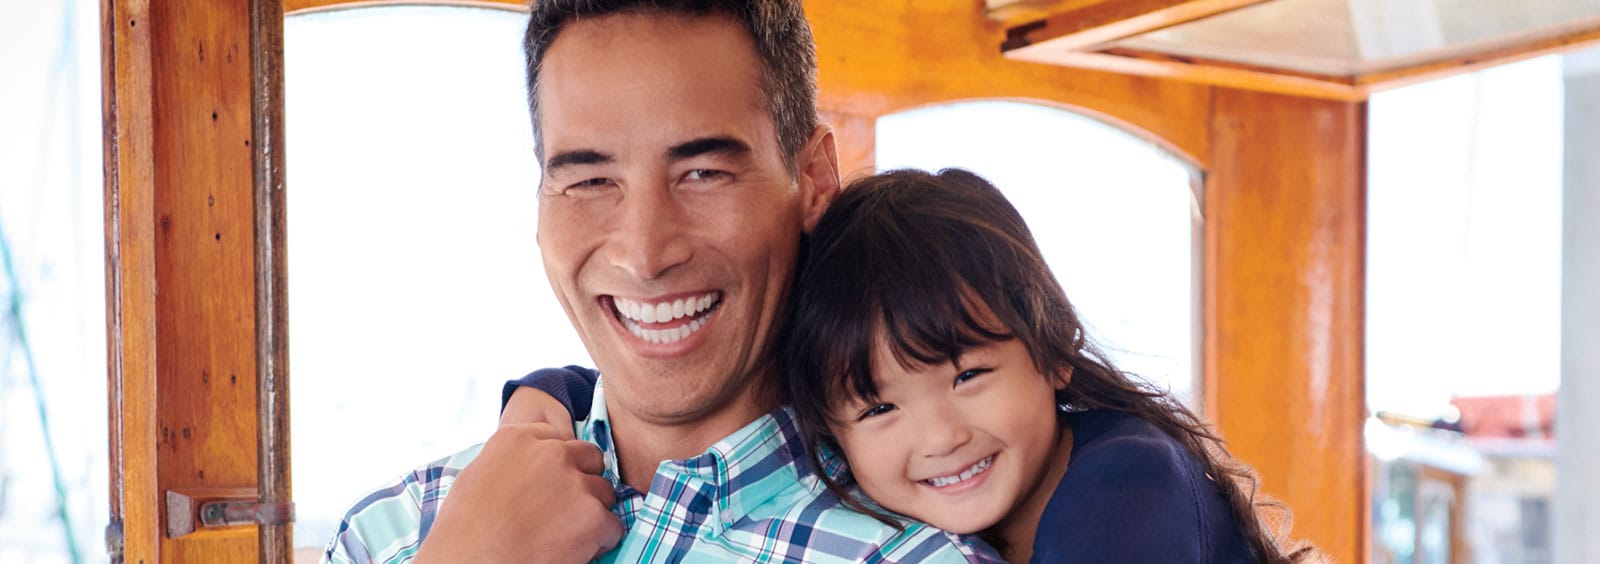 Making Father's Day special | Lands' End